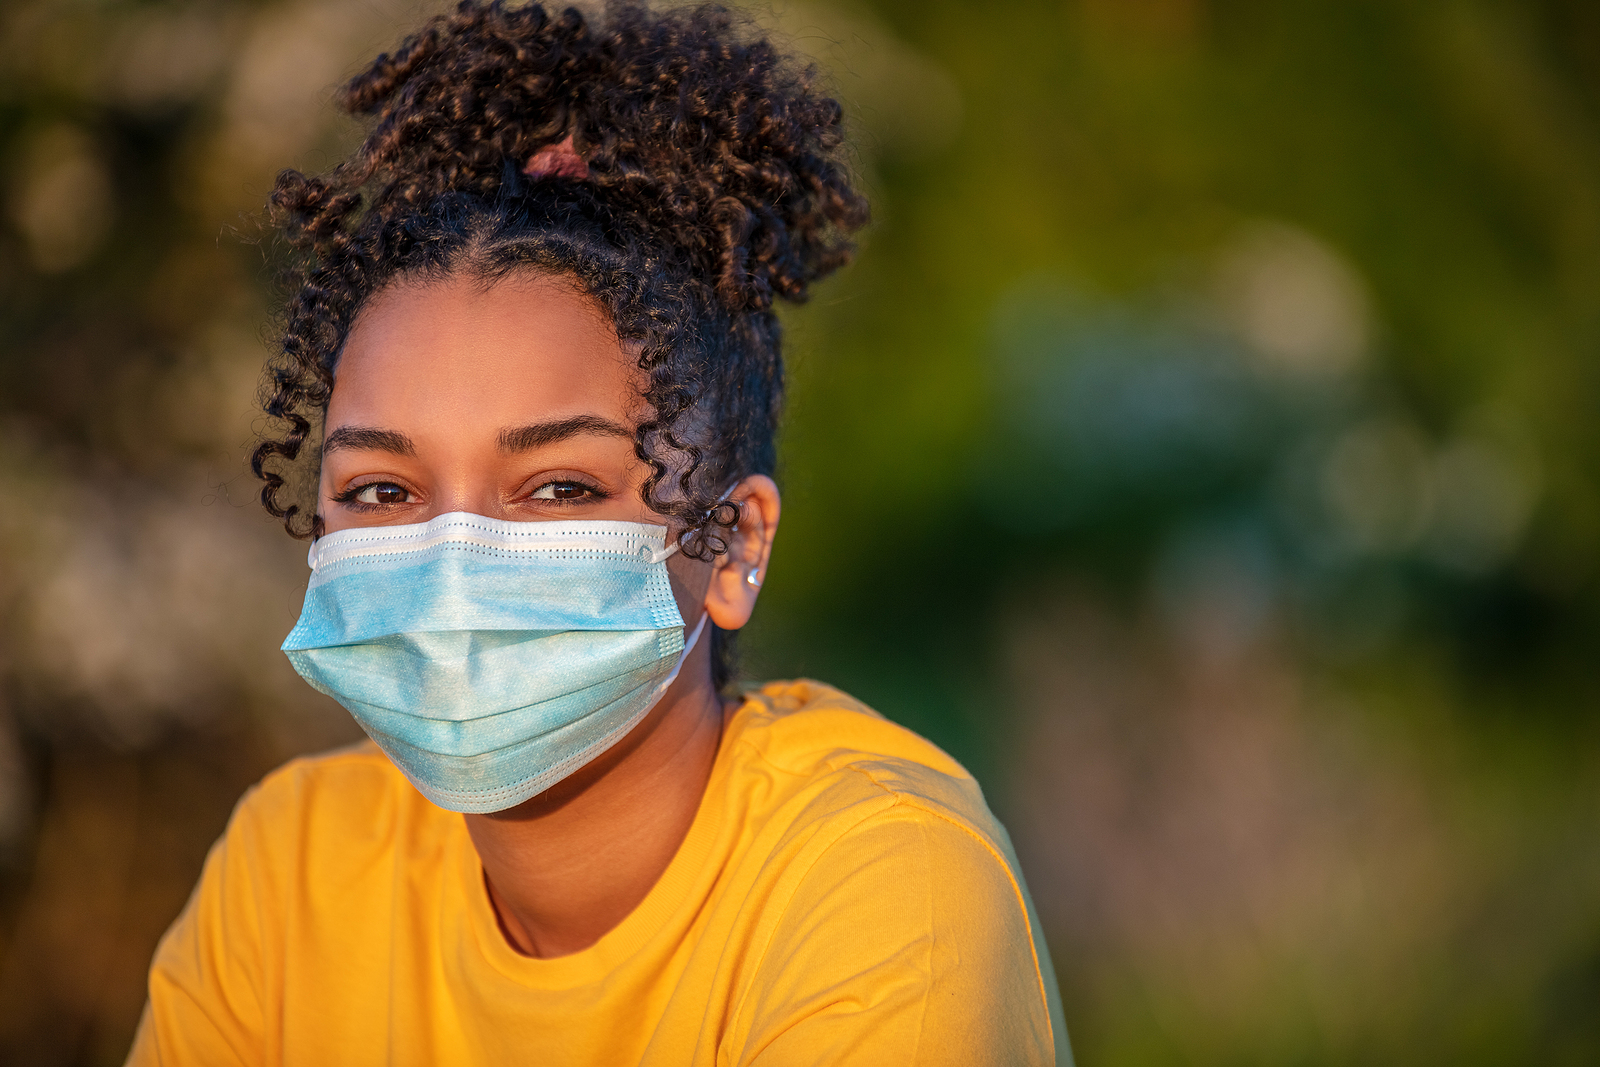 Mixed race African American teenager teen girl young woman wearing a face mask outside during the Coronavirus COVID-19 pandemic